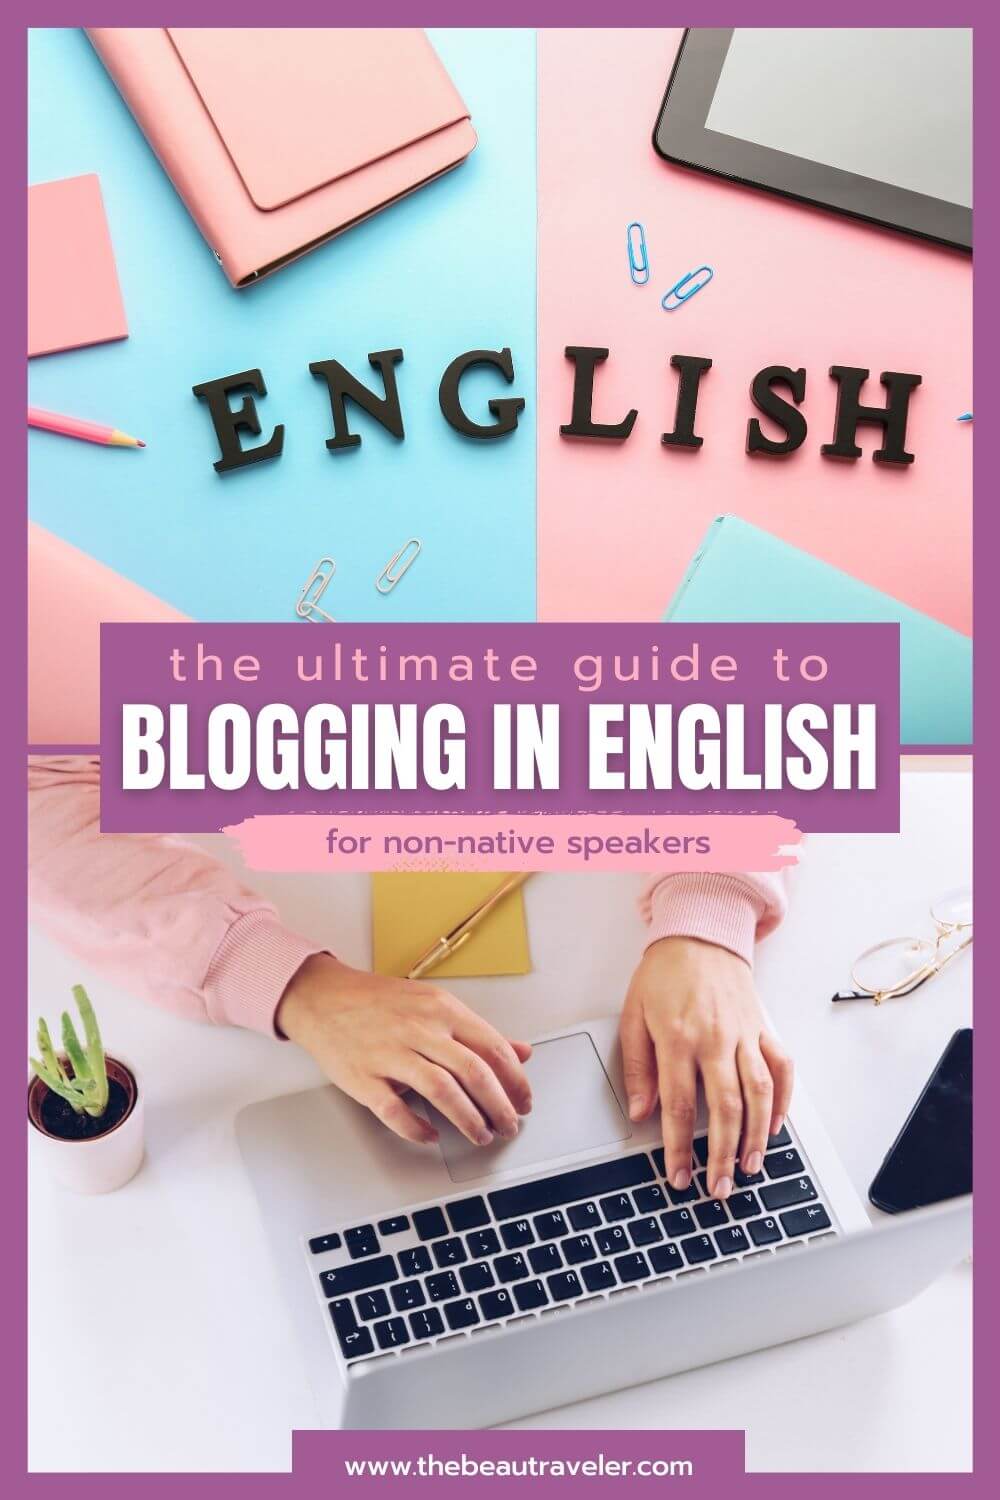 The Ultimate Guide to Blogging in English for Non-Native Speakers - The BeauTraveler